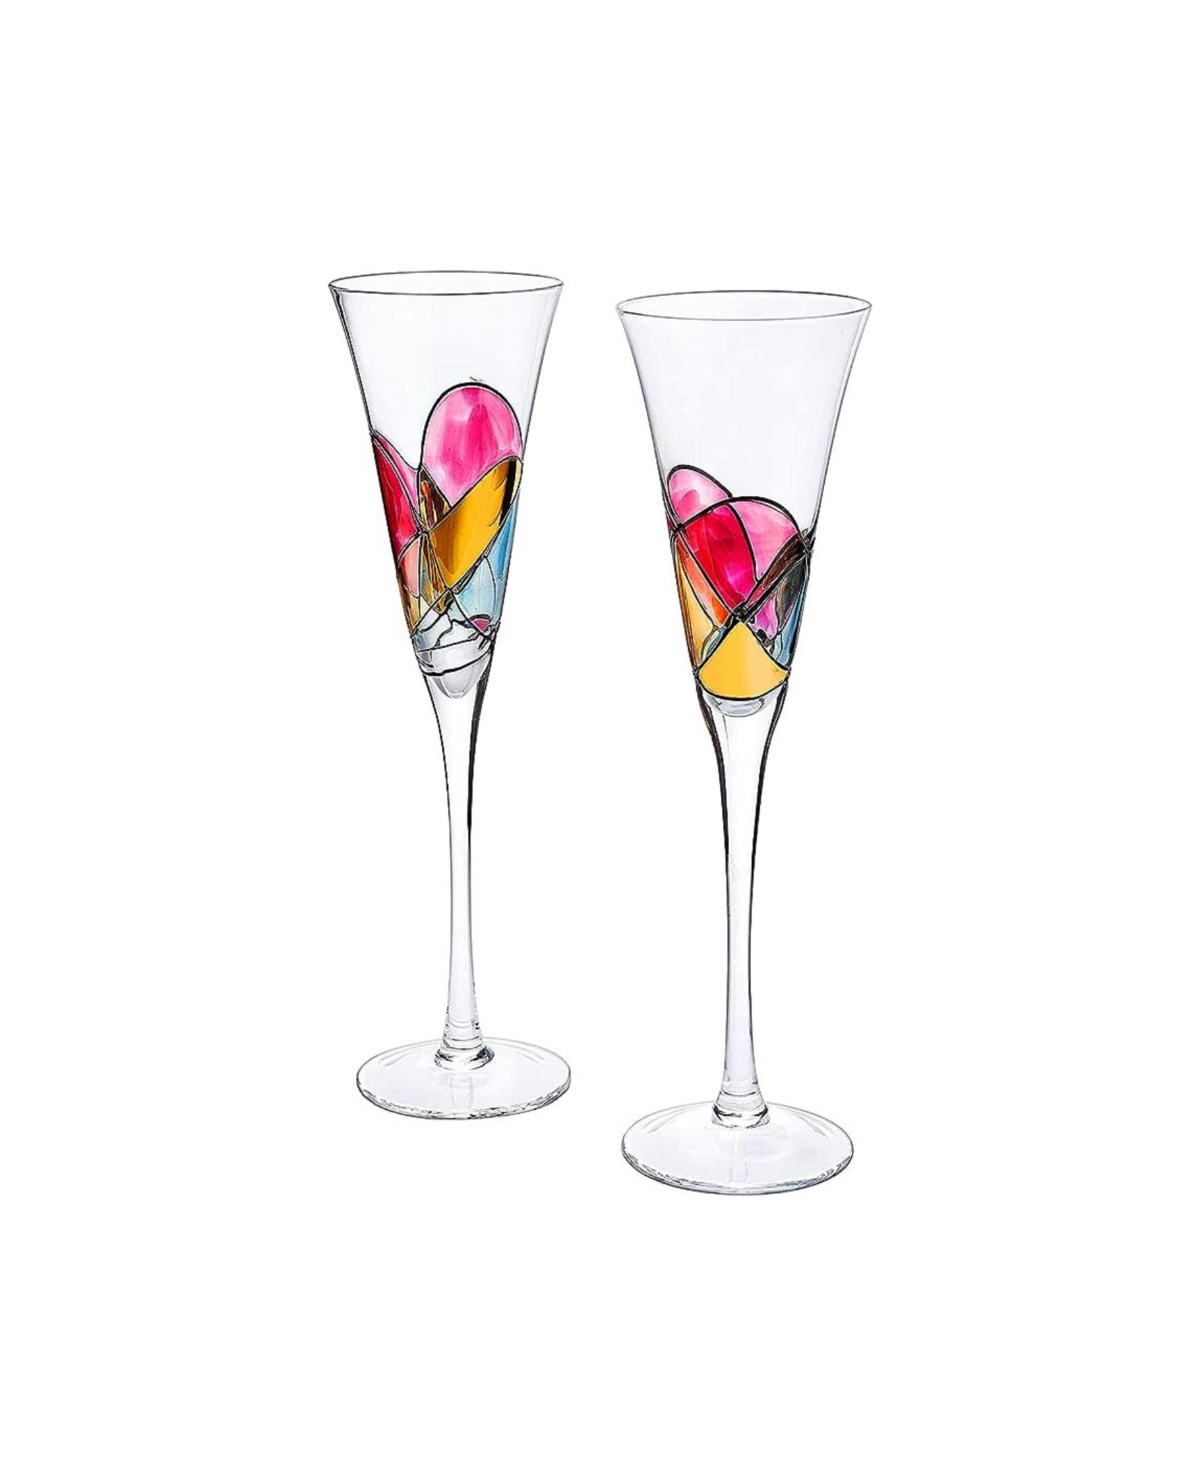 The Wine Savant Artisanal Hand Painted Champagne Flutes, Set Of 2 In Multicolor